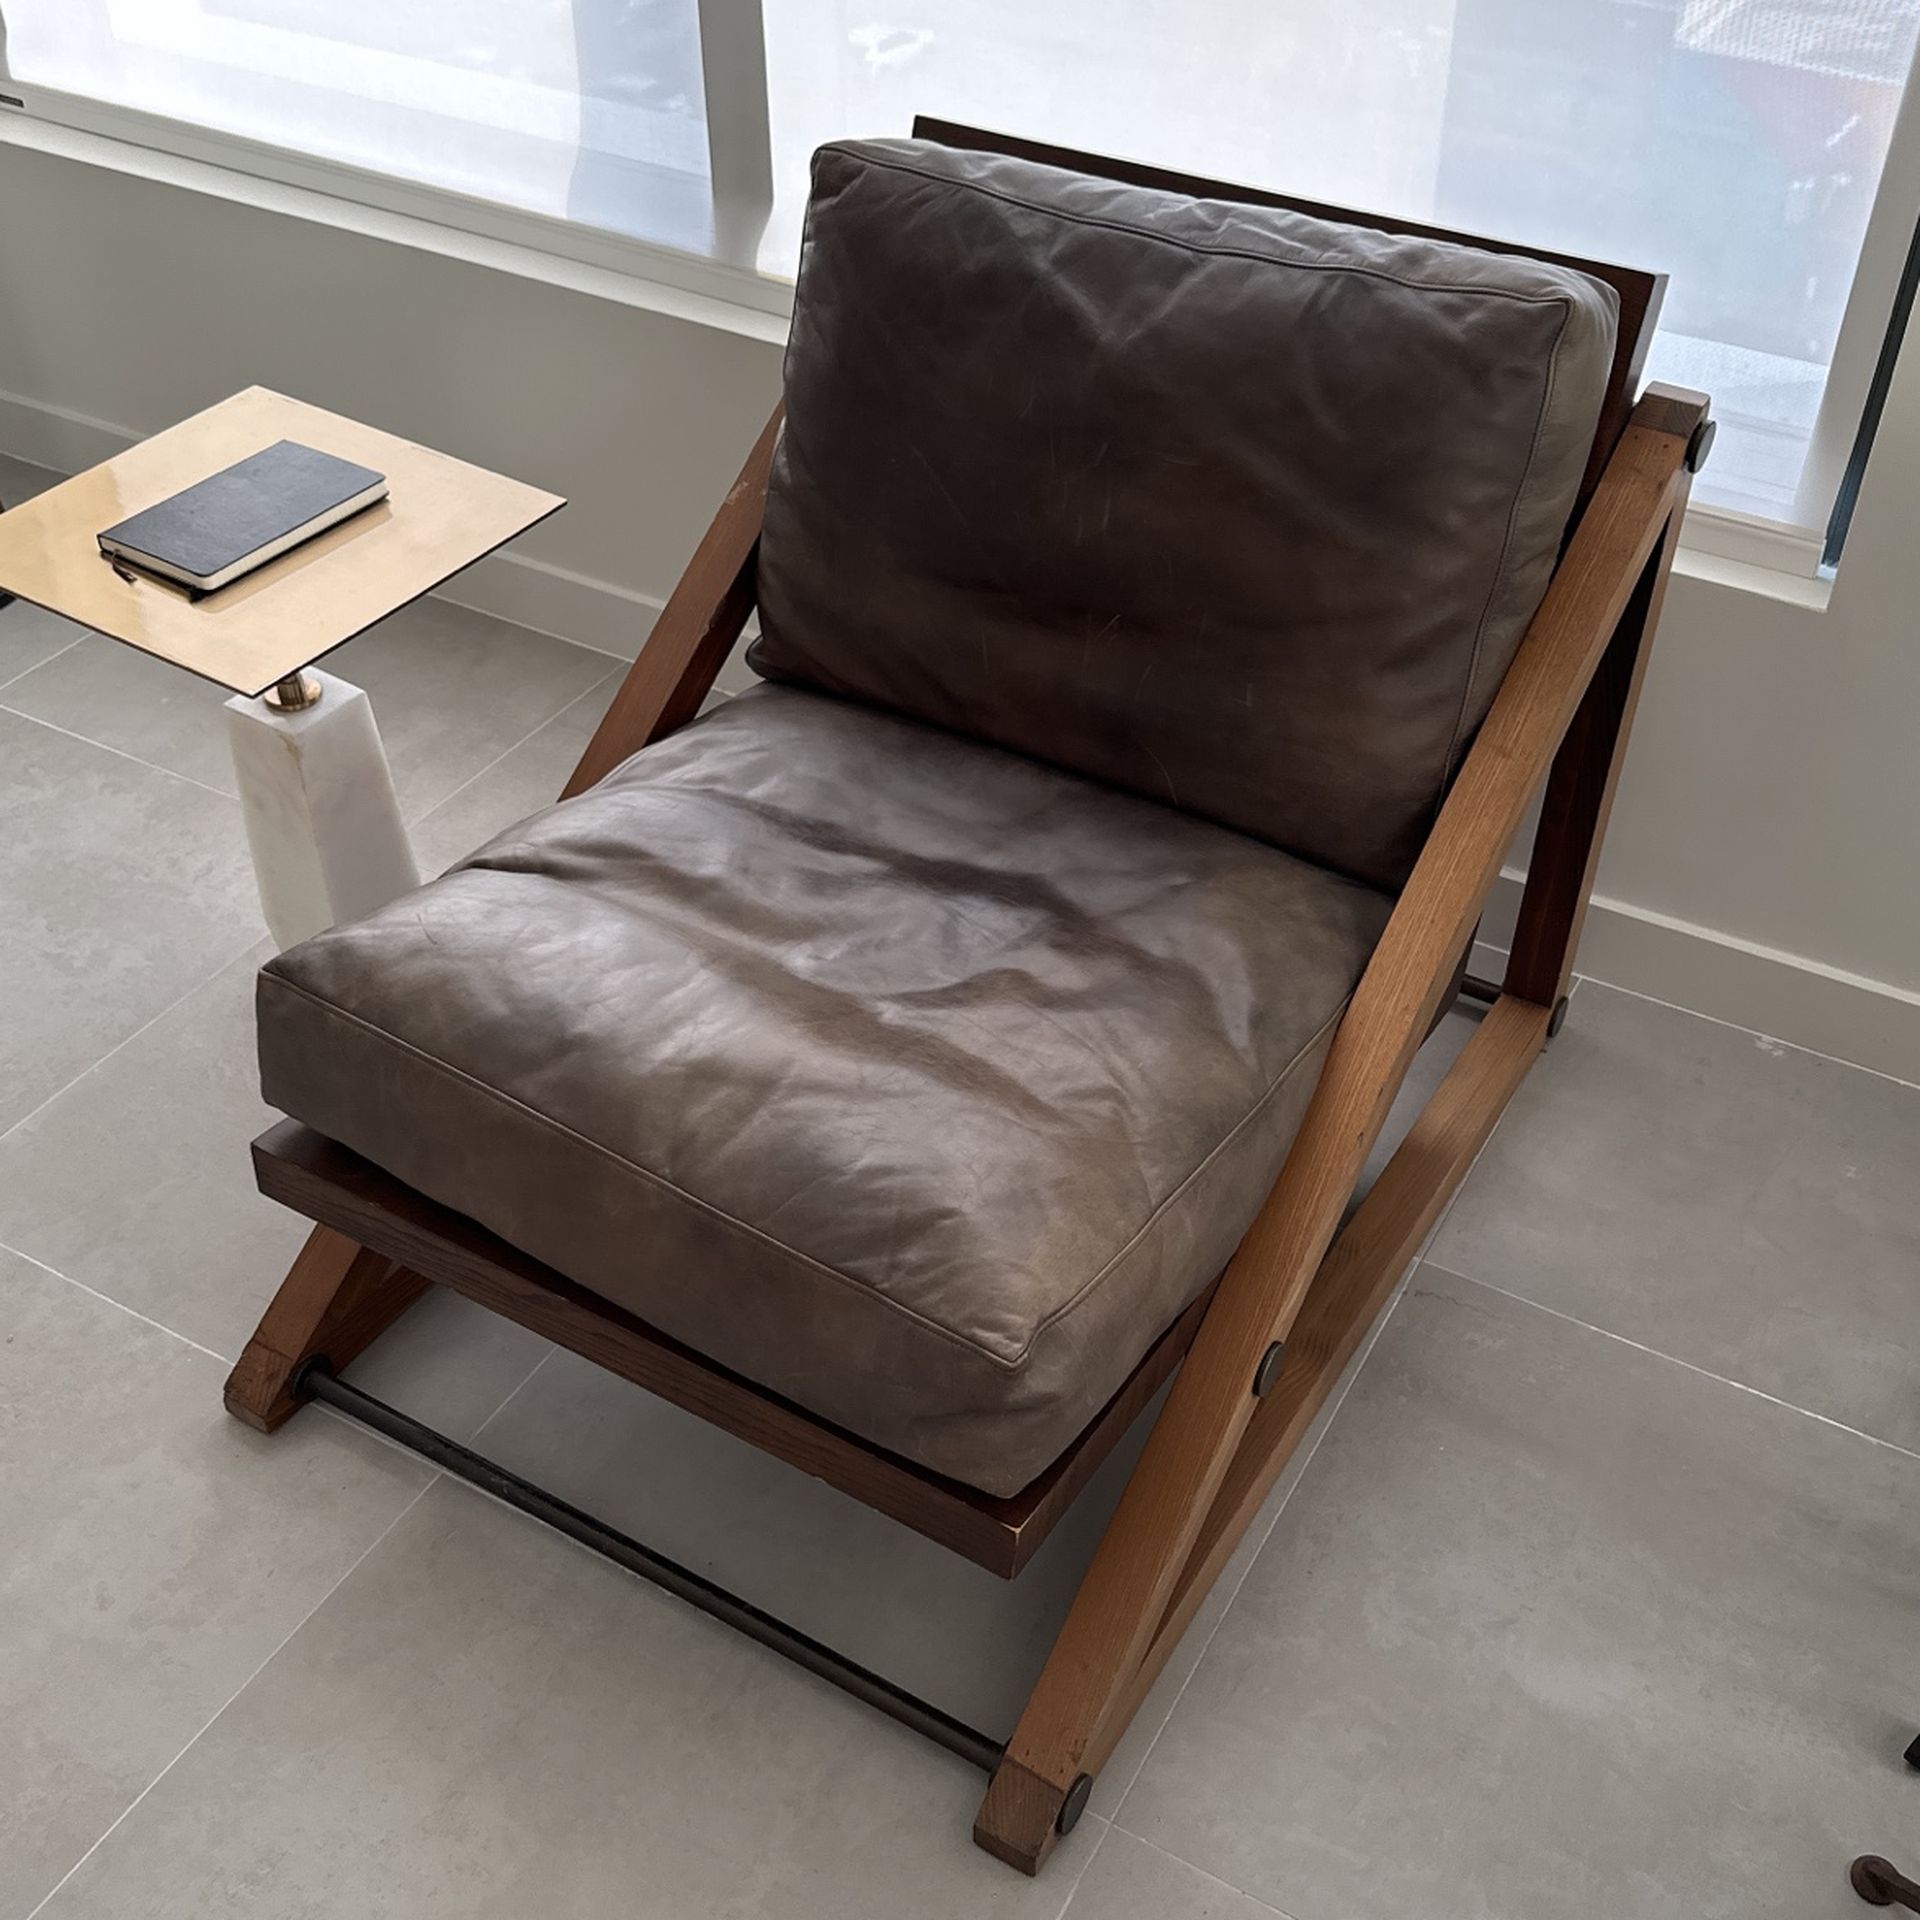 Natural leather and wood chair - HD buttercup California